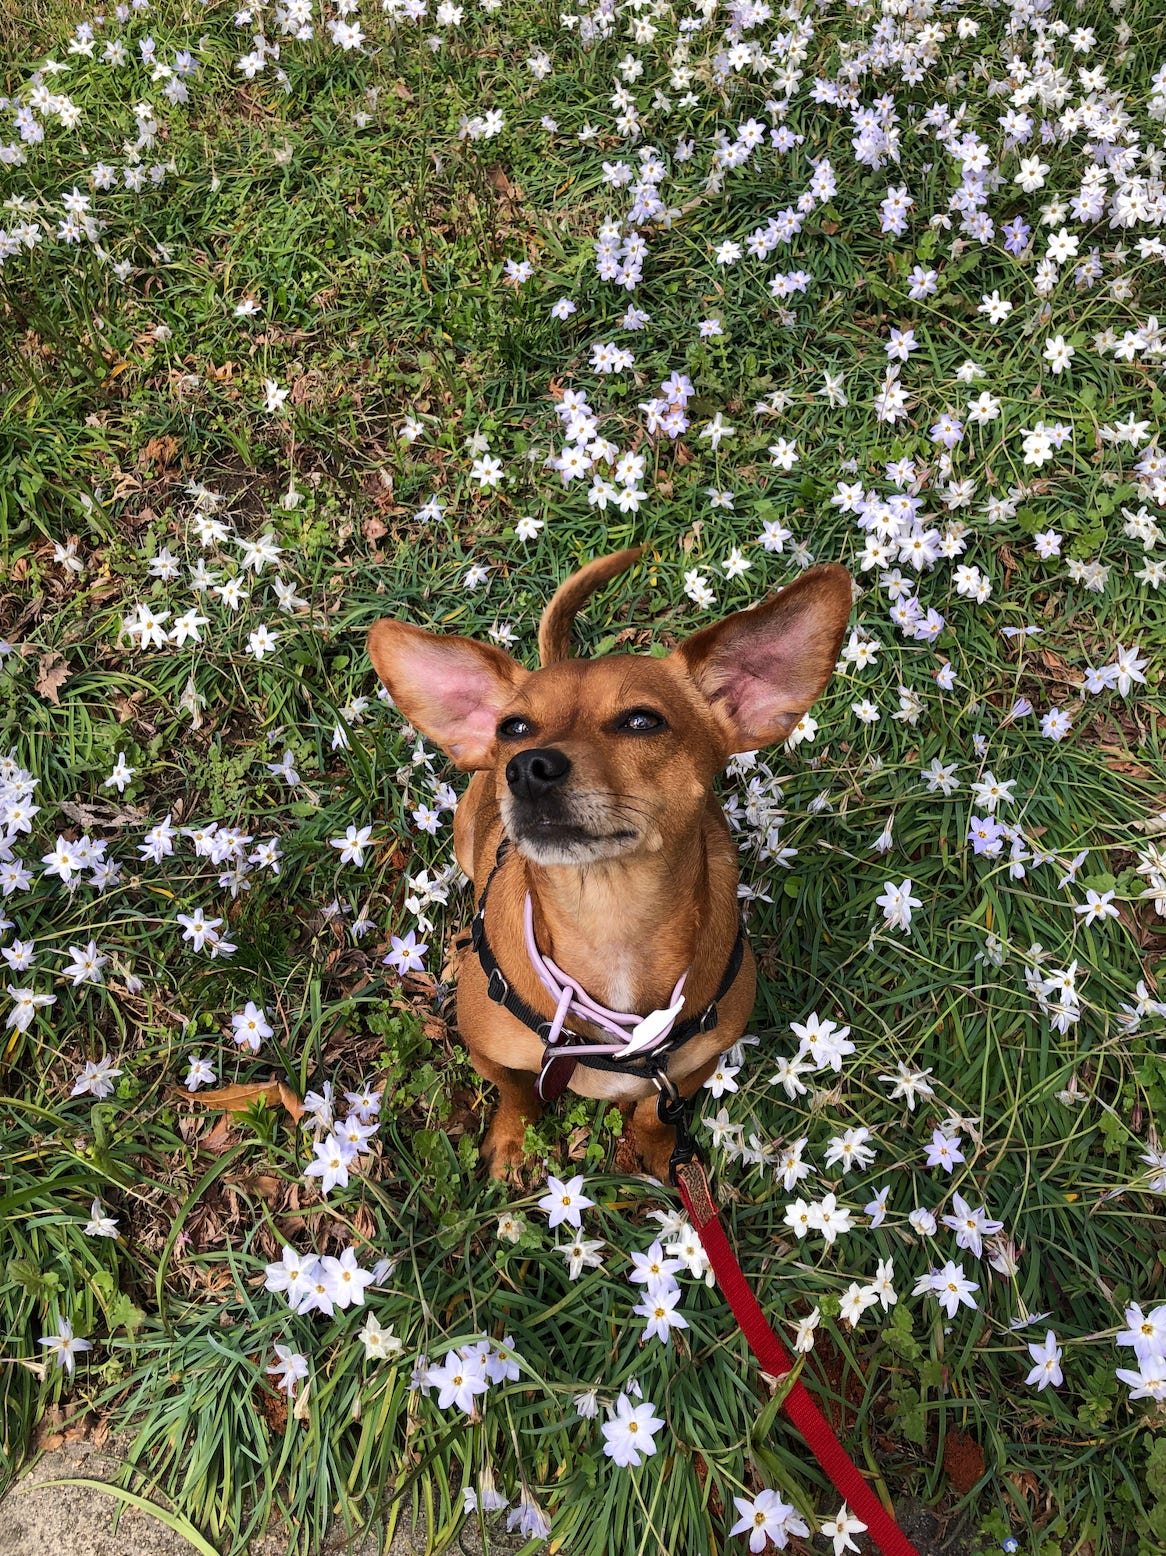 photo of a small red/brown dog in a field of flowers